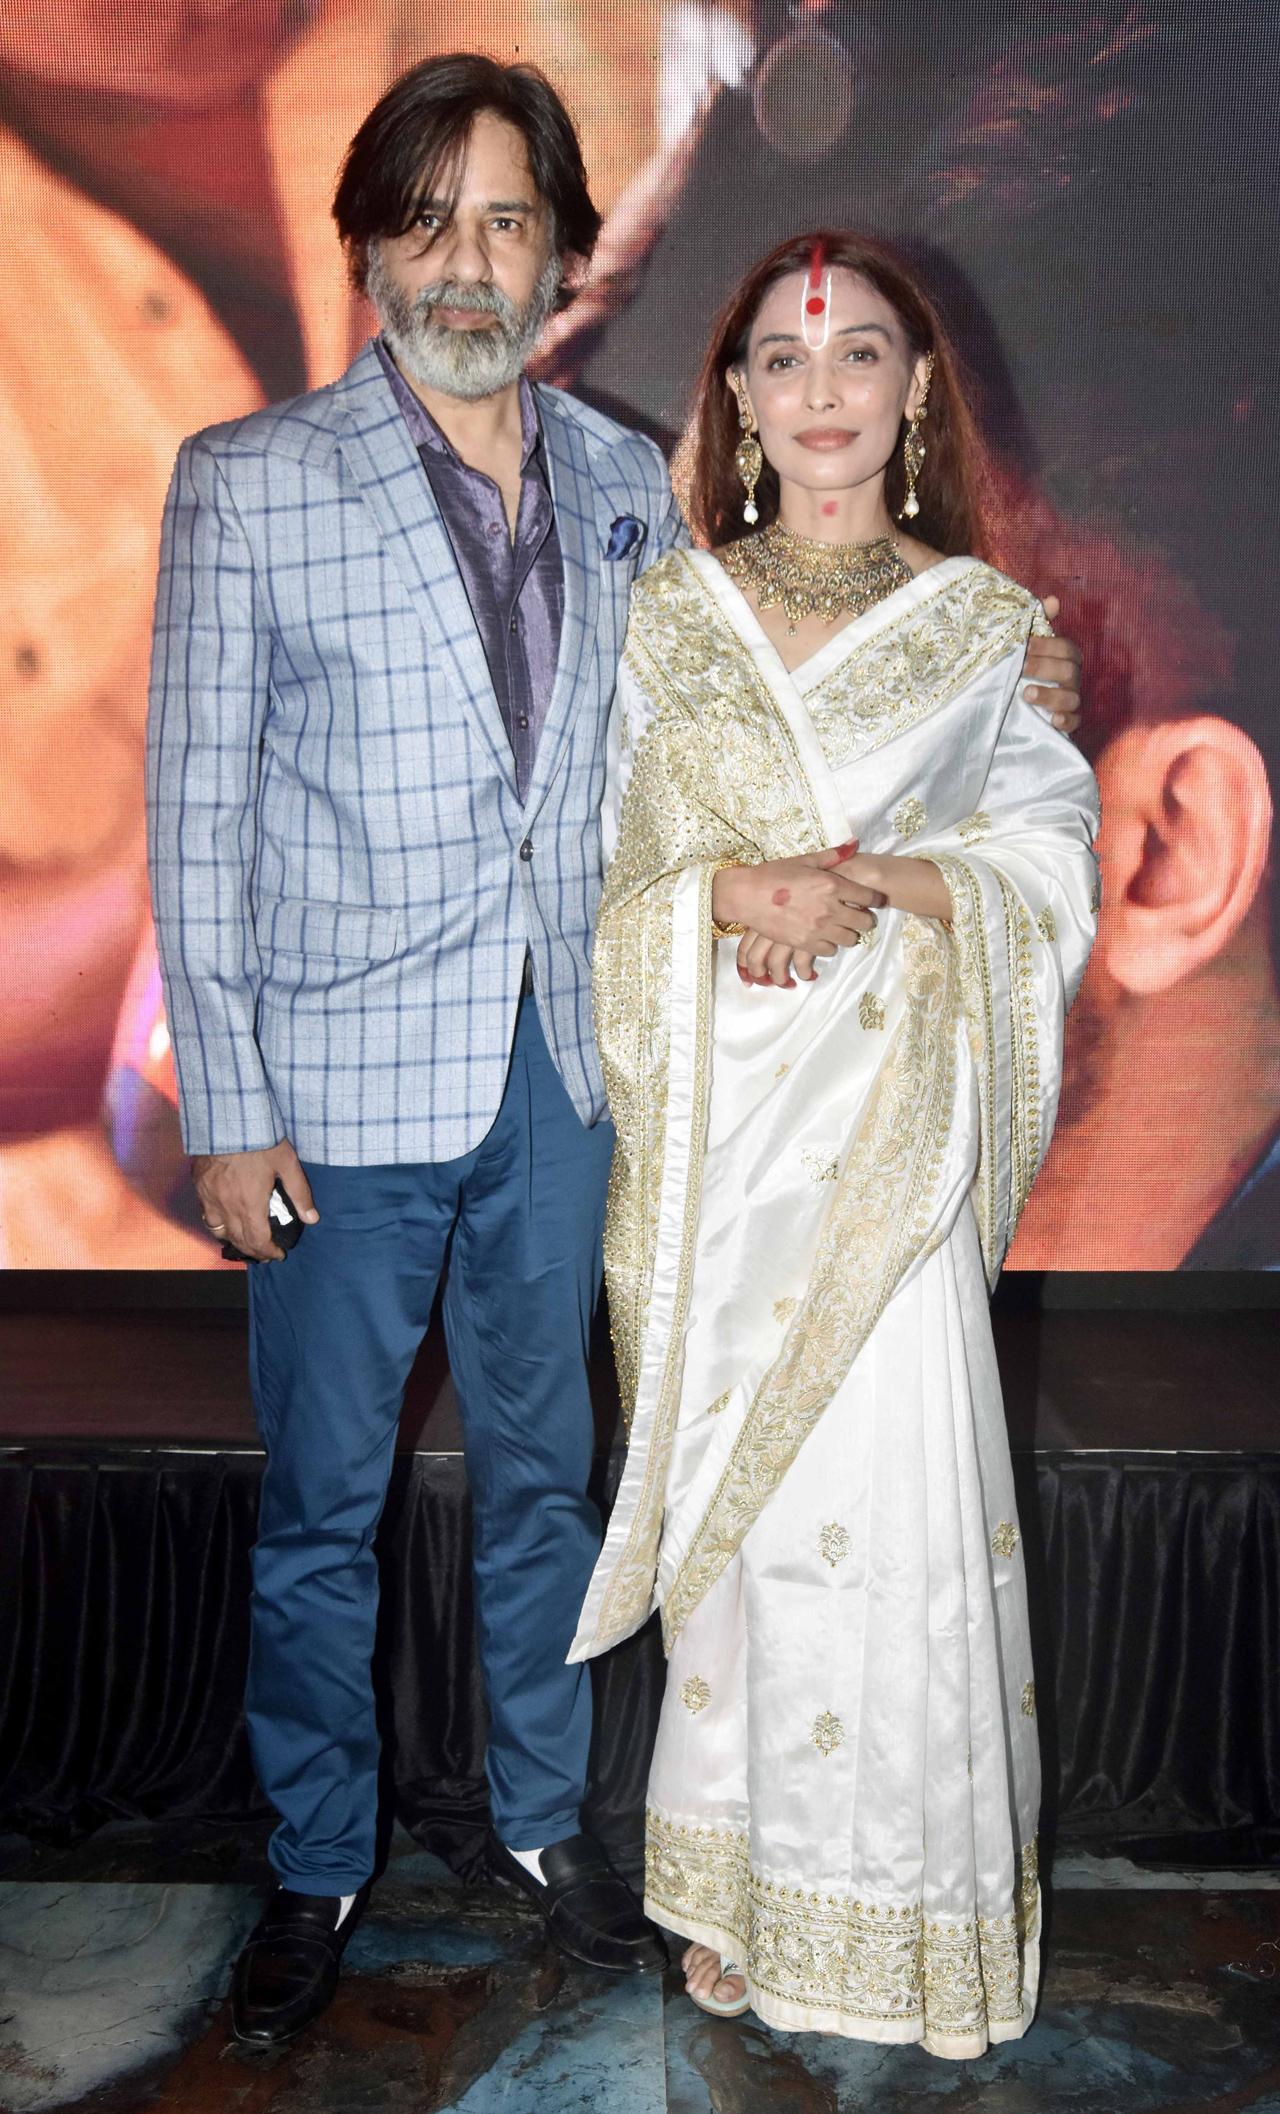 Actor Rahul Roy graced the music launch of 'Lakk Shake' with his sister, Priyanka. The actor, who had suffered a brain stroke while shooting for the film 'LAC: Live The Battle' in Kargil in November last year, had his younger sister by his side throughout his recovering days.